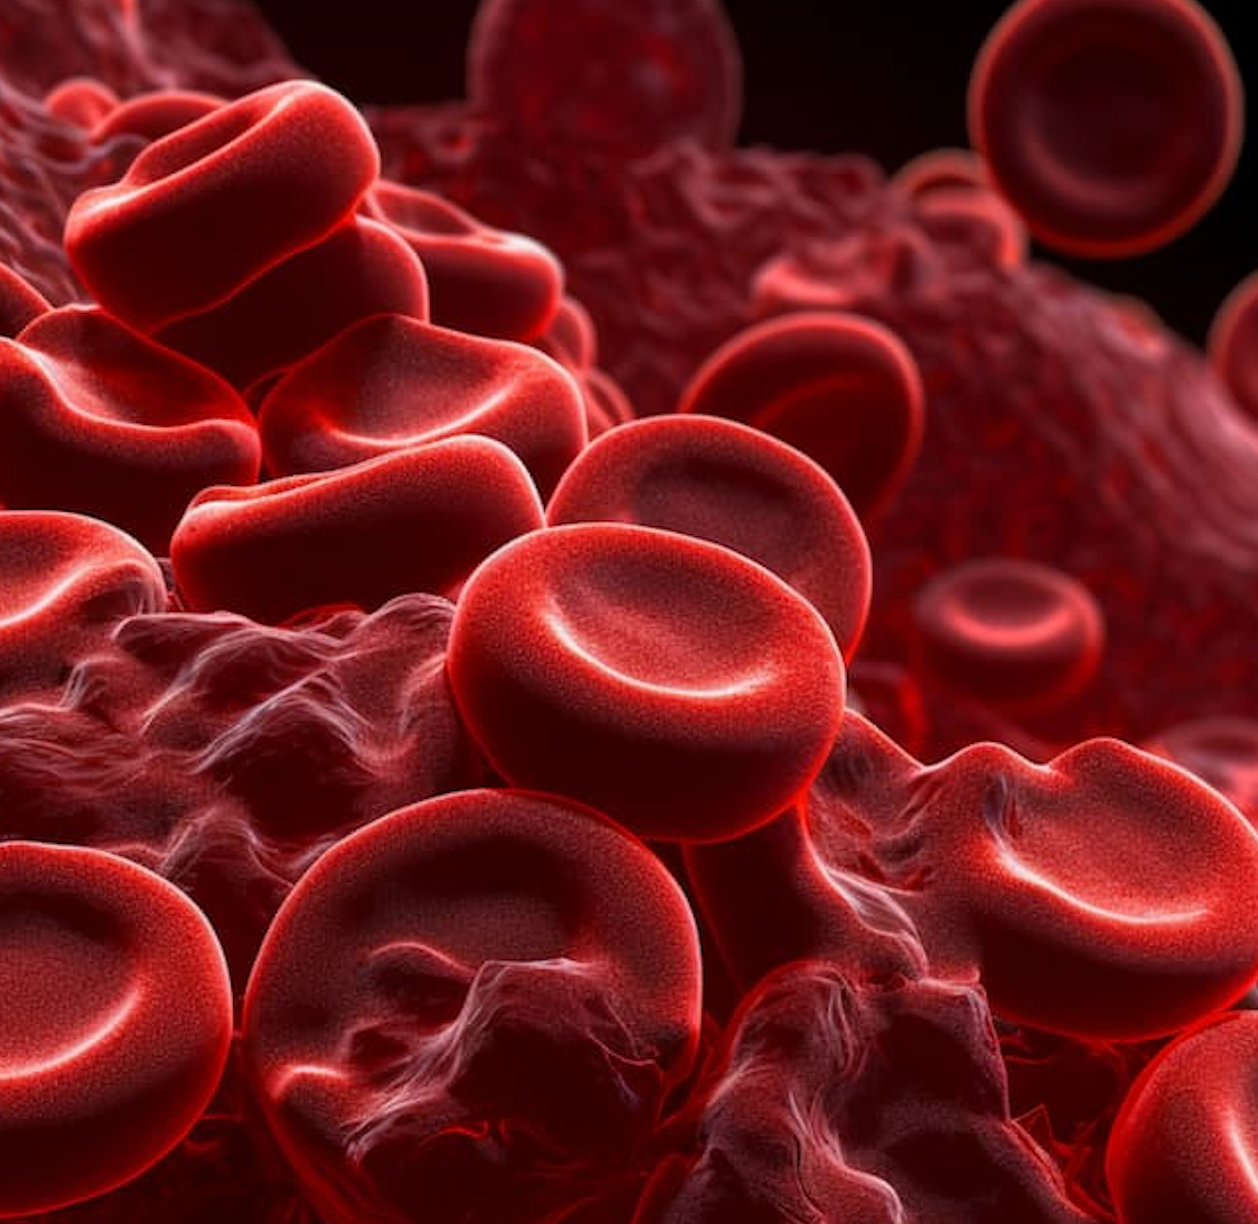 Biosimilar QL0911 Increases, Maintains Platelet Counts in Primary Immune Thrombocytopenia 